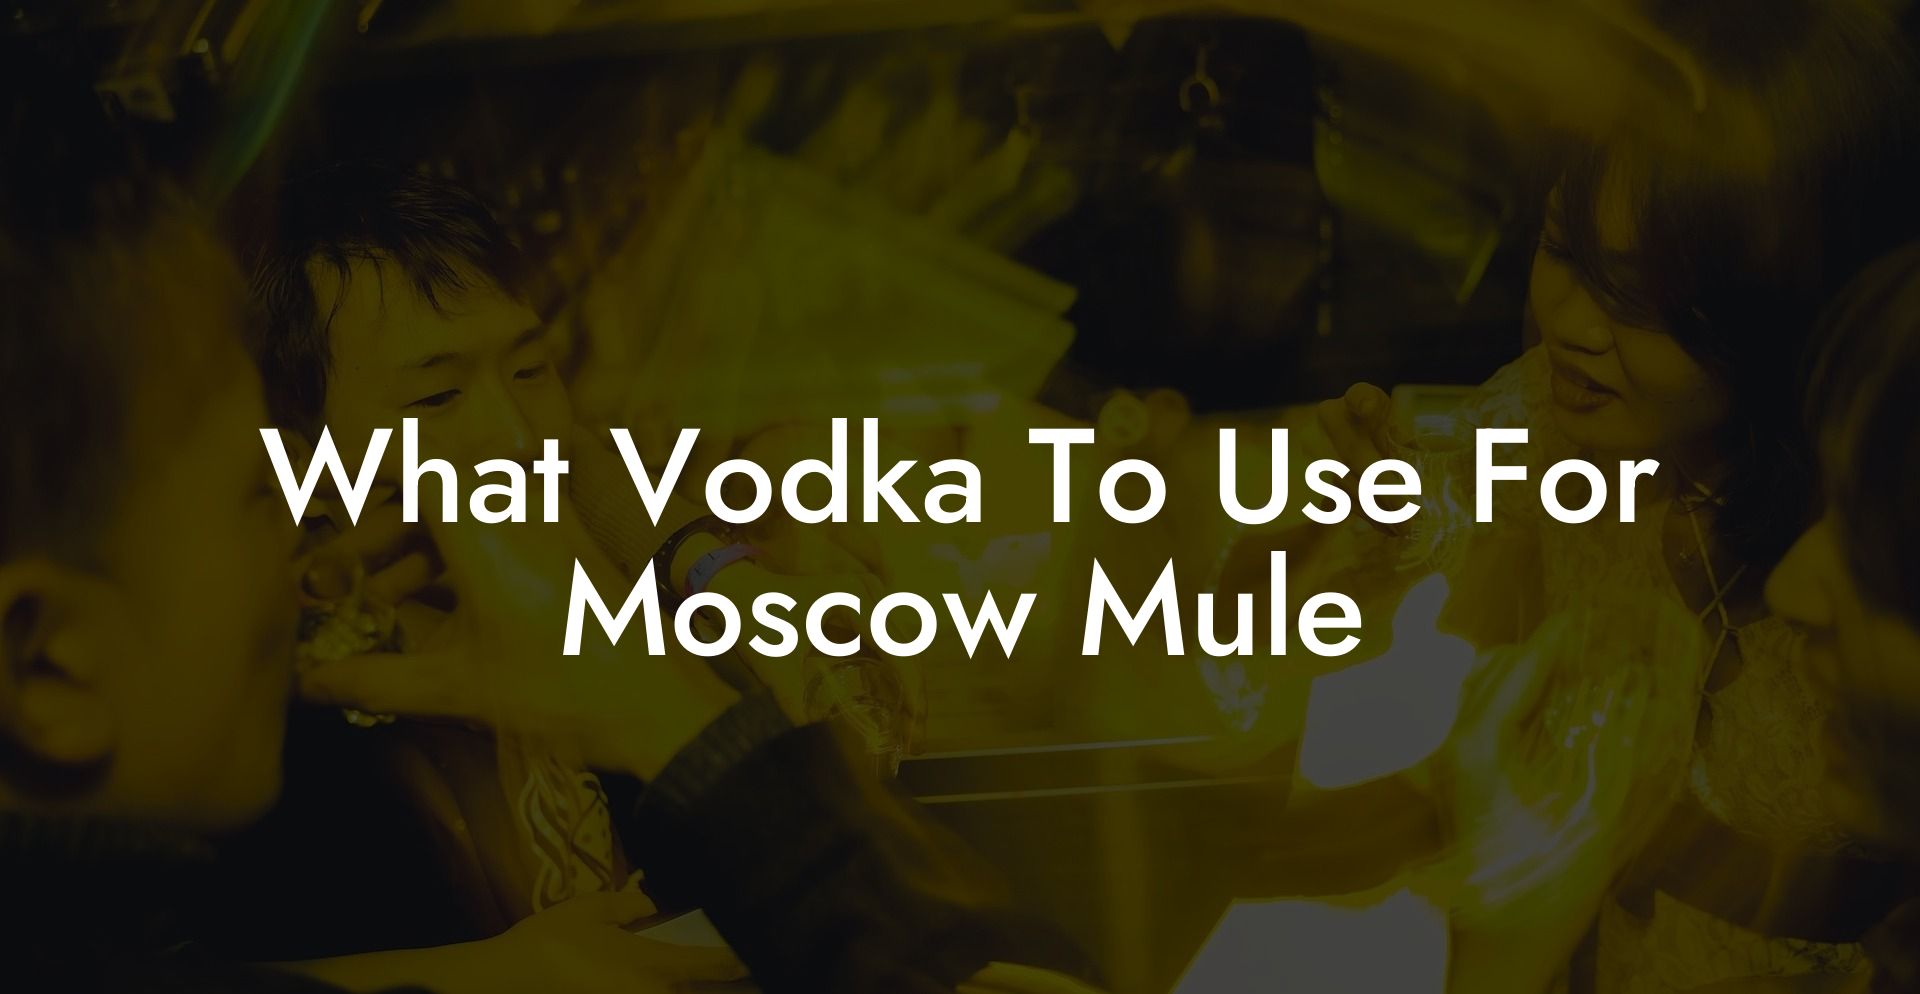 What Vodka To Use For Moscow Mule